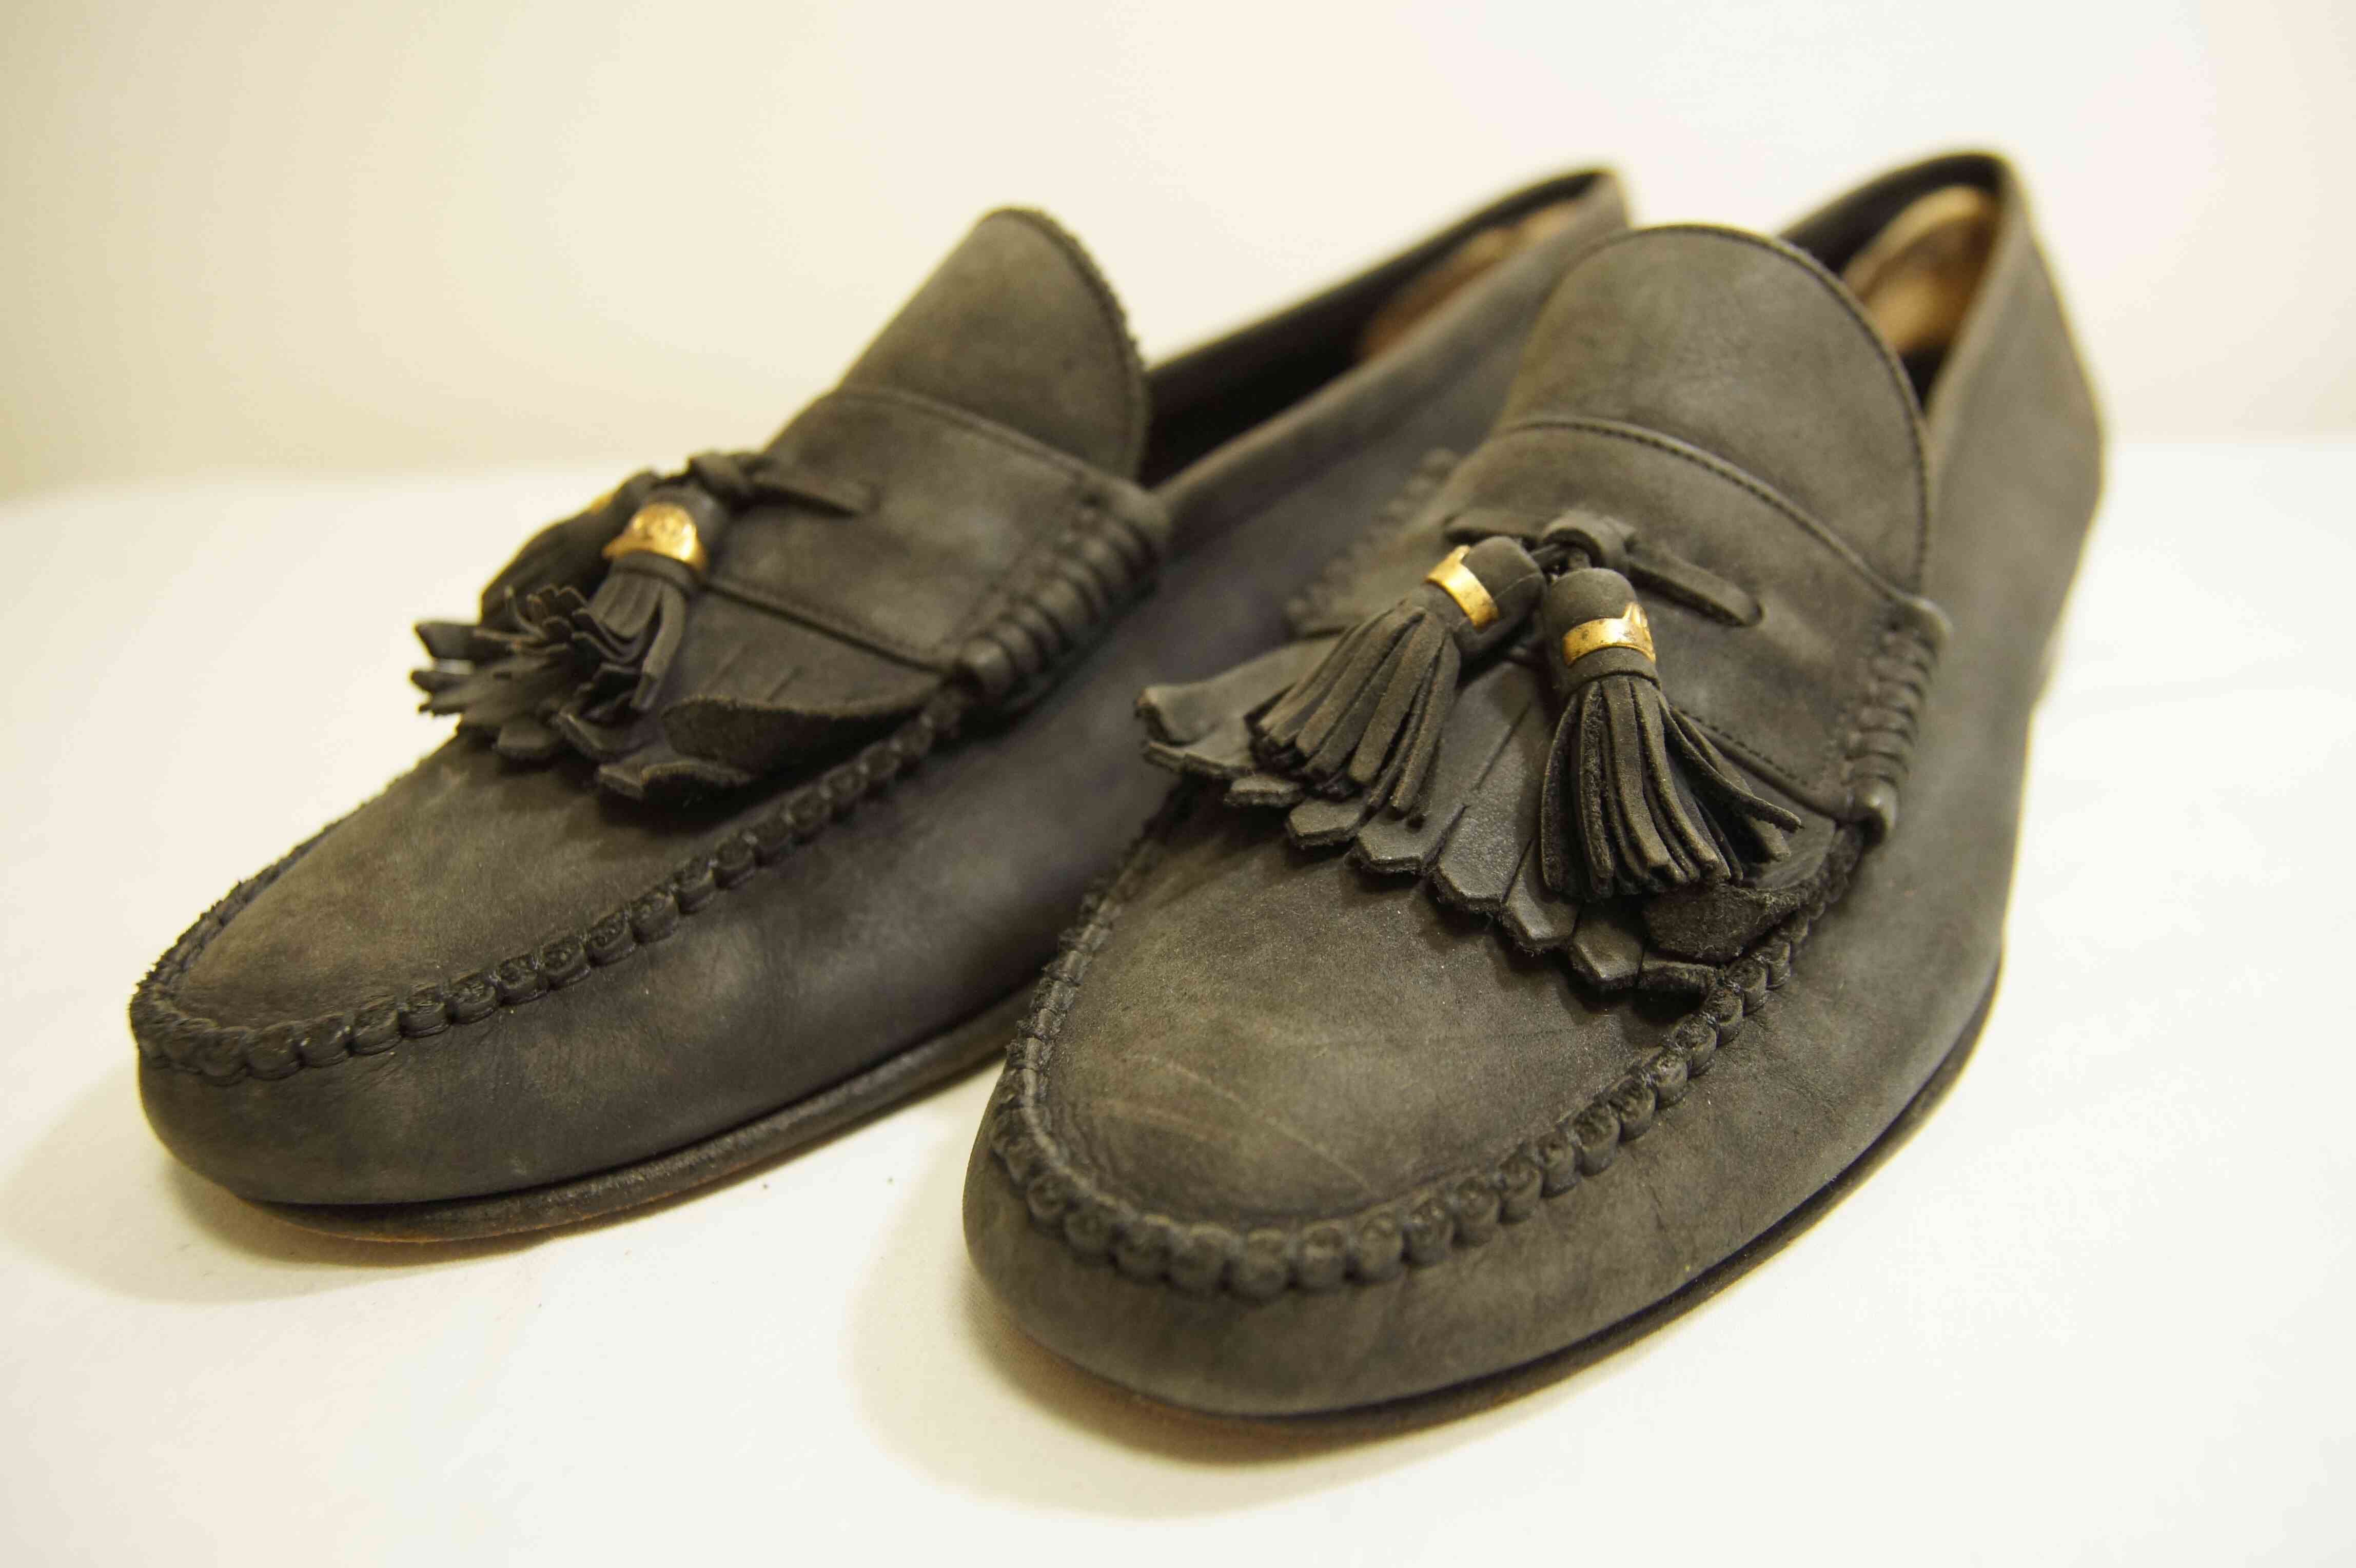 [OLD GUCCI] Suede Tasseled Loafer スエードタッセルローファー